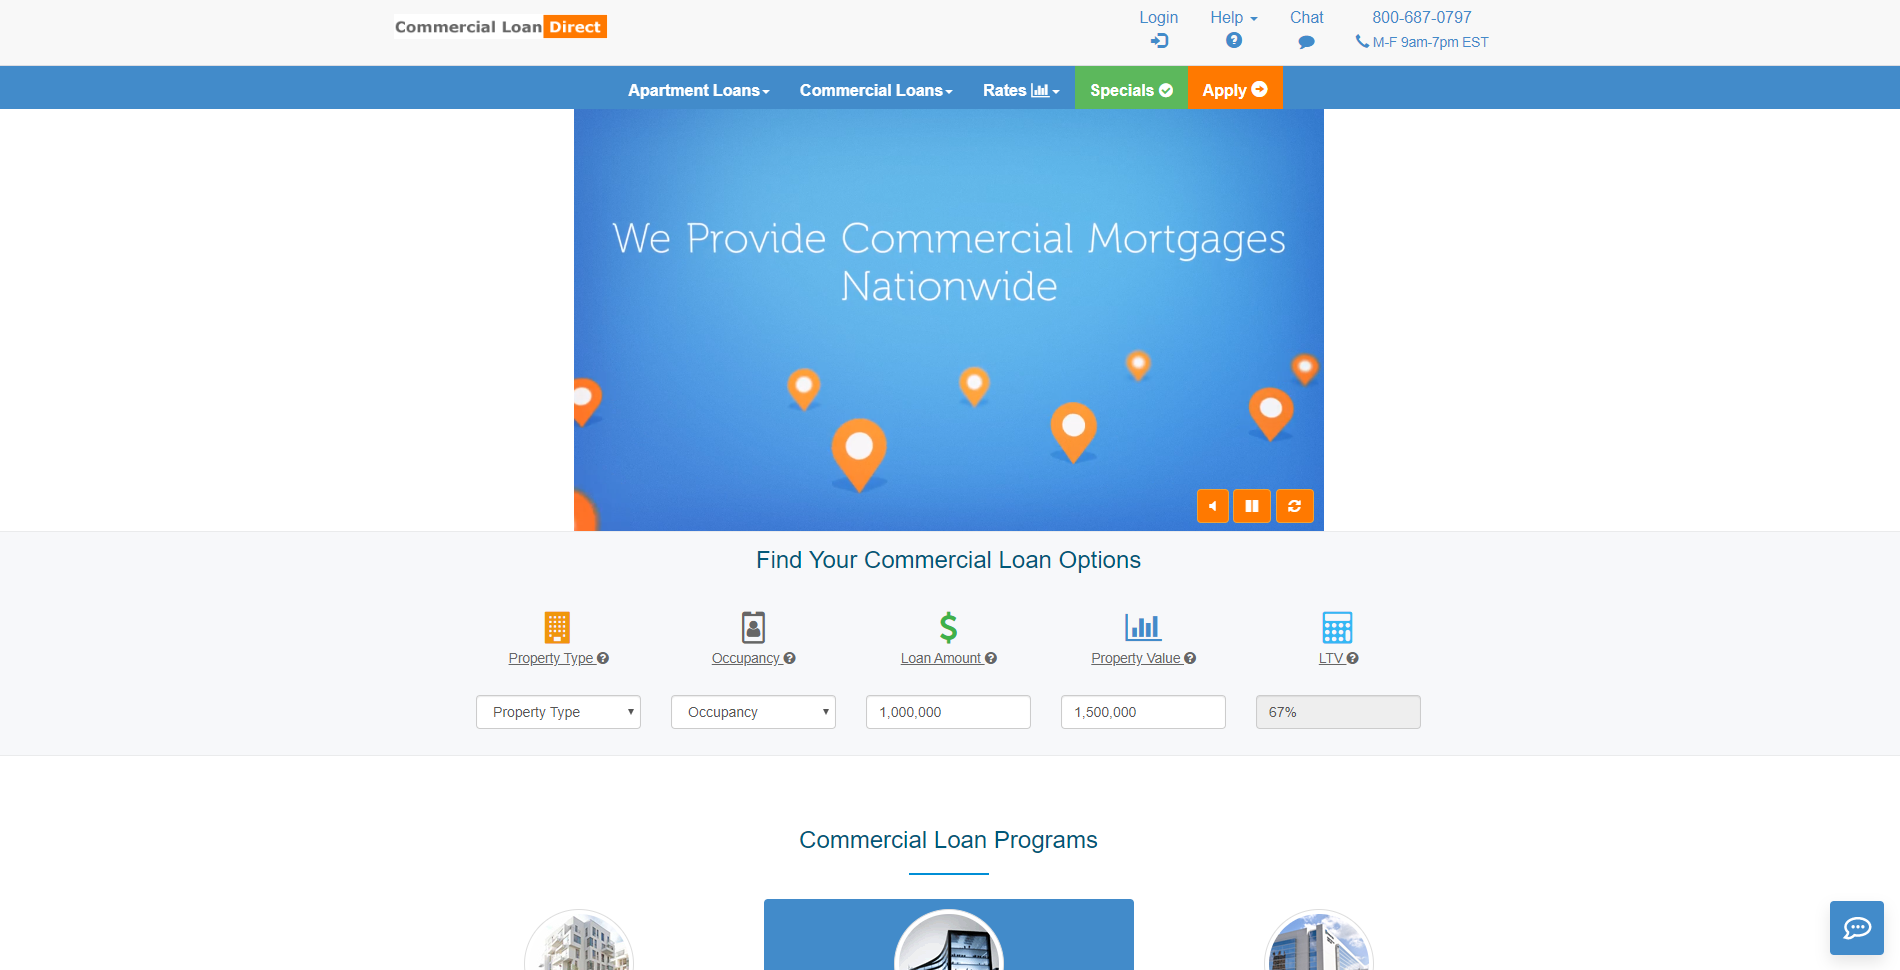 Commercial Loan Direct